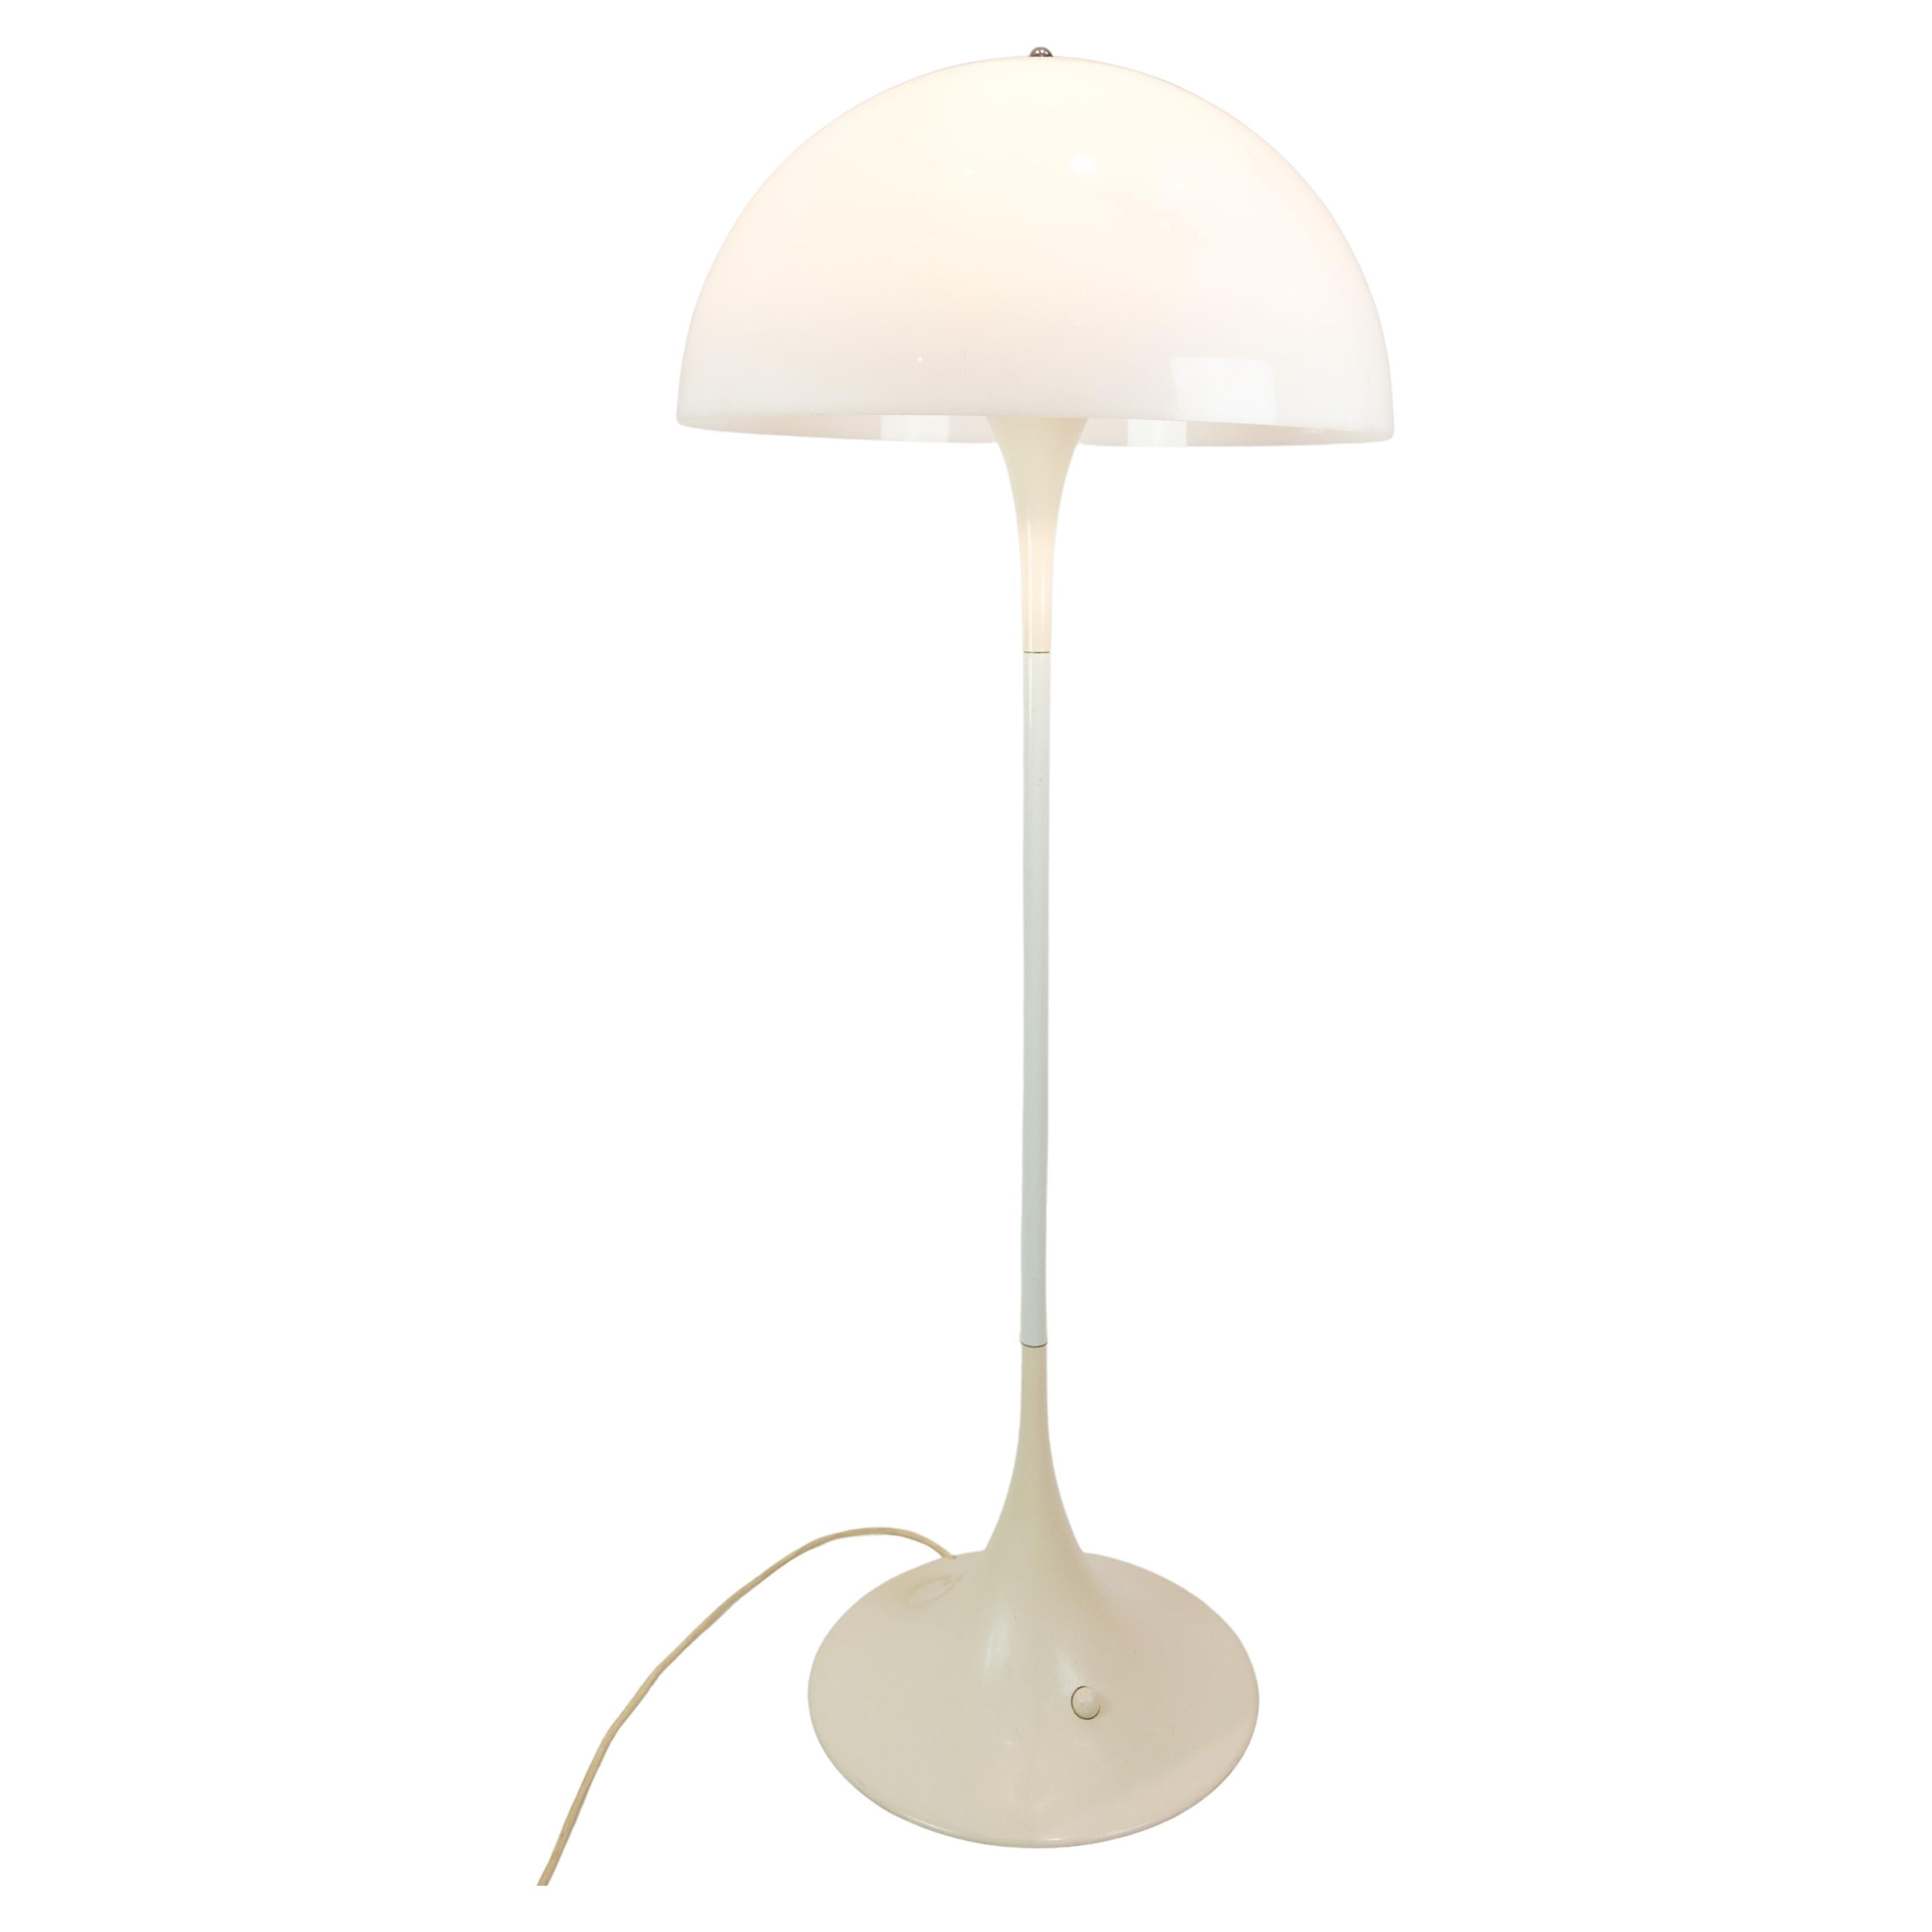 Floor Lamp Model Panthella By Verner Panton For Louis Poulsen From 1980s For Sale